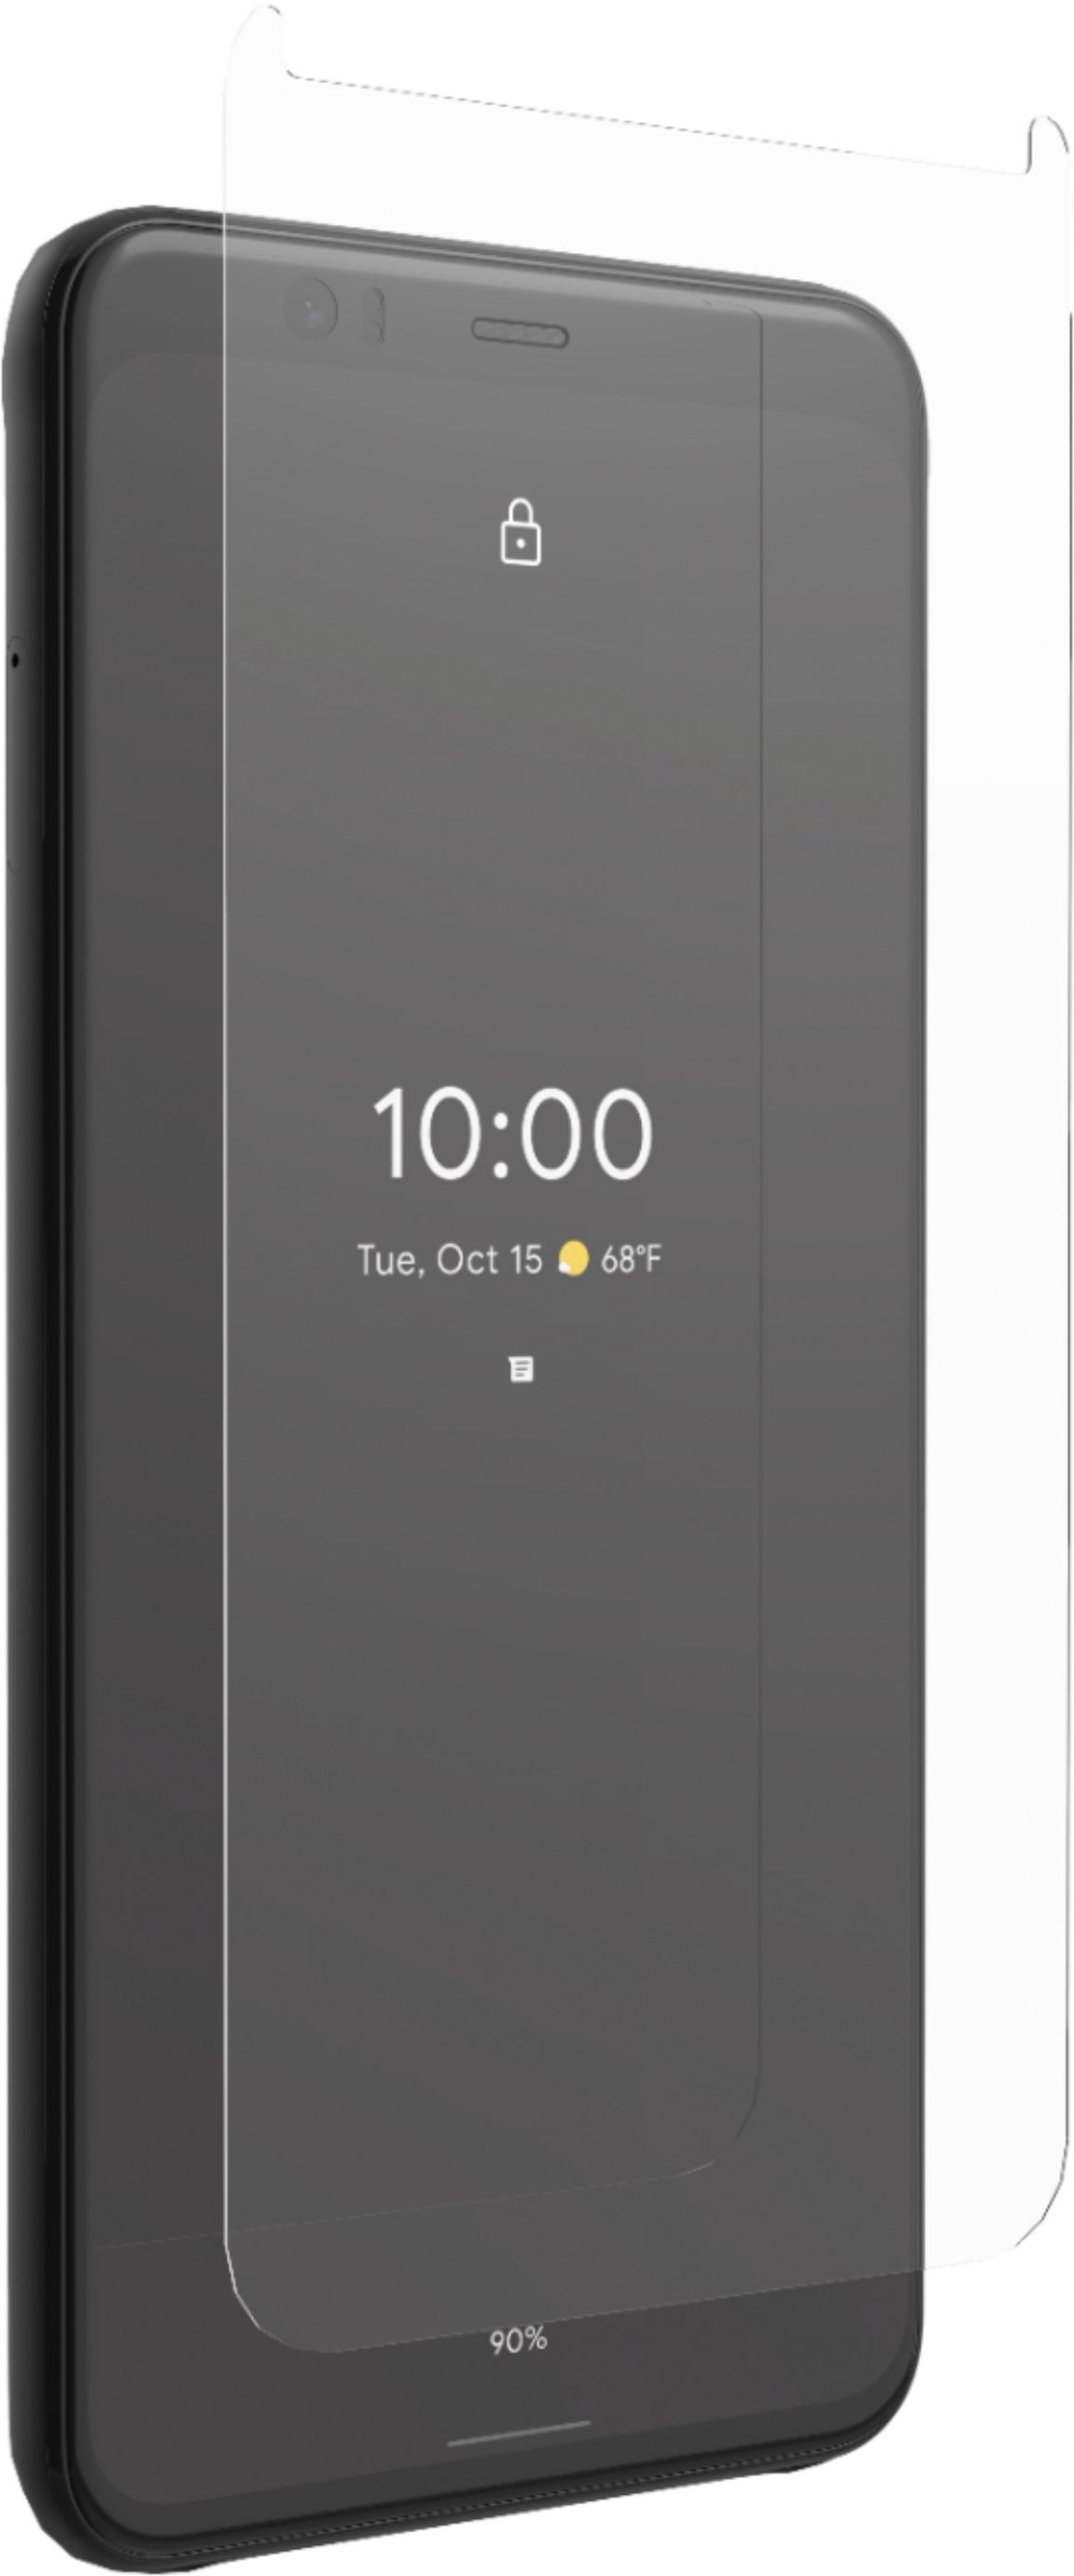 Angle View: ZAGG - InvisibleShield Glass Elite Screen Protector for Google Pixel 4 XL - Clear